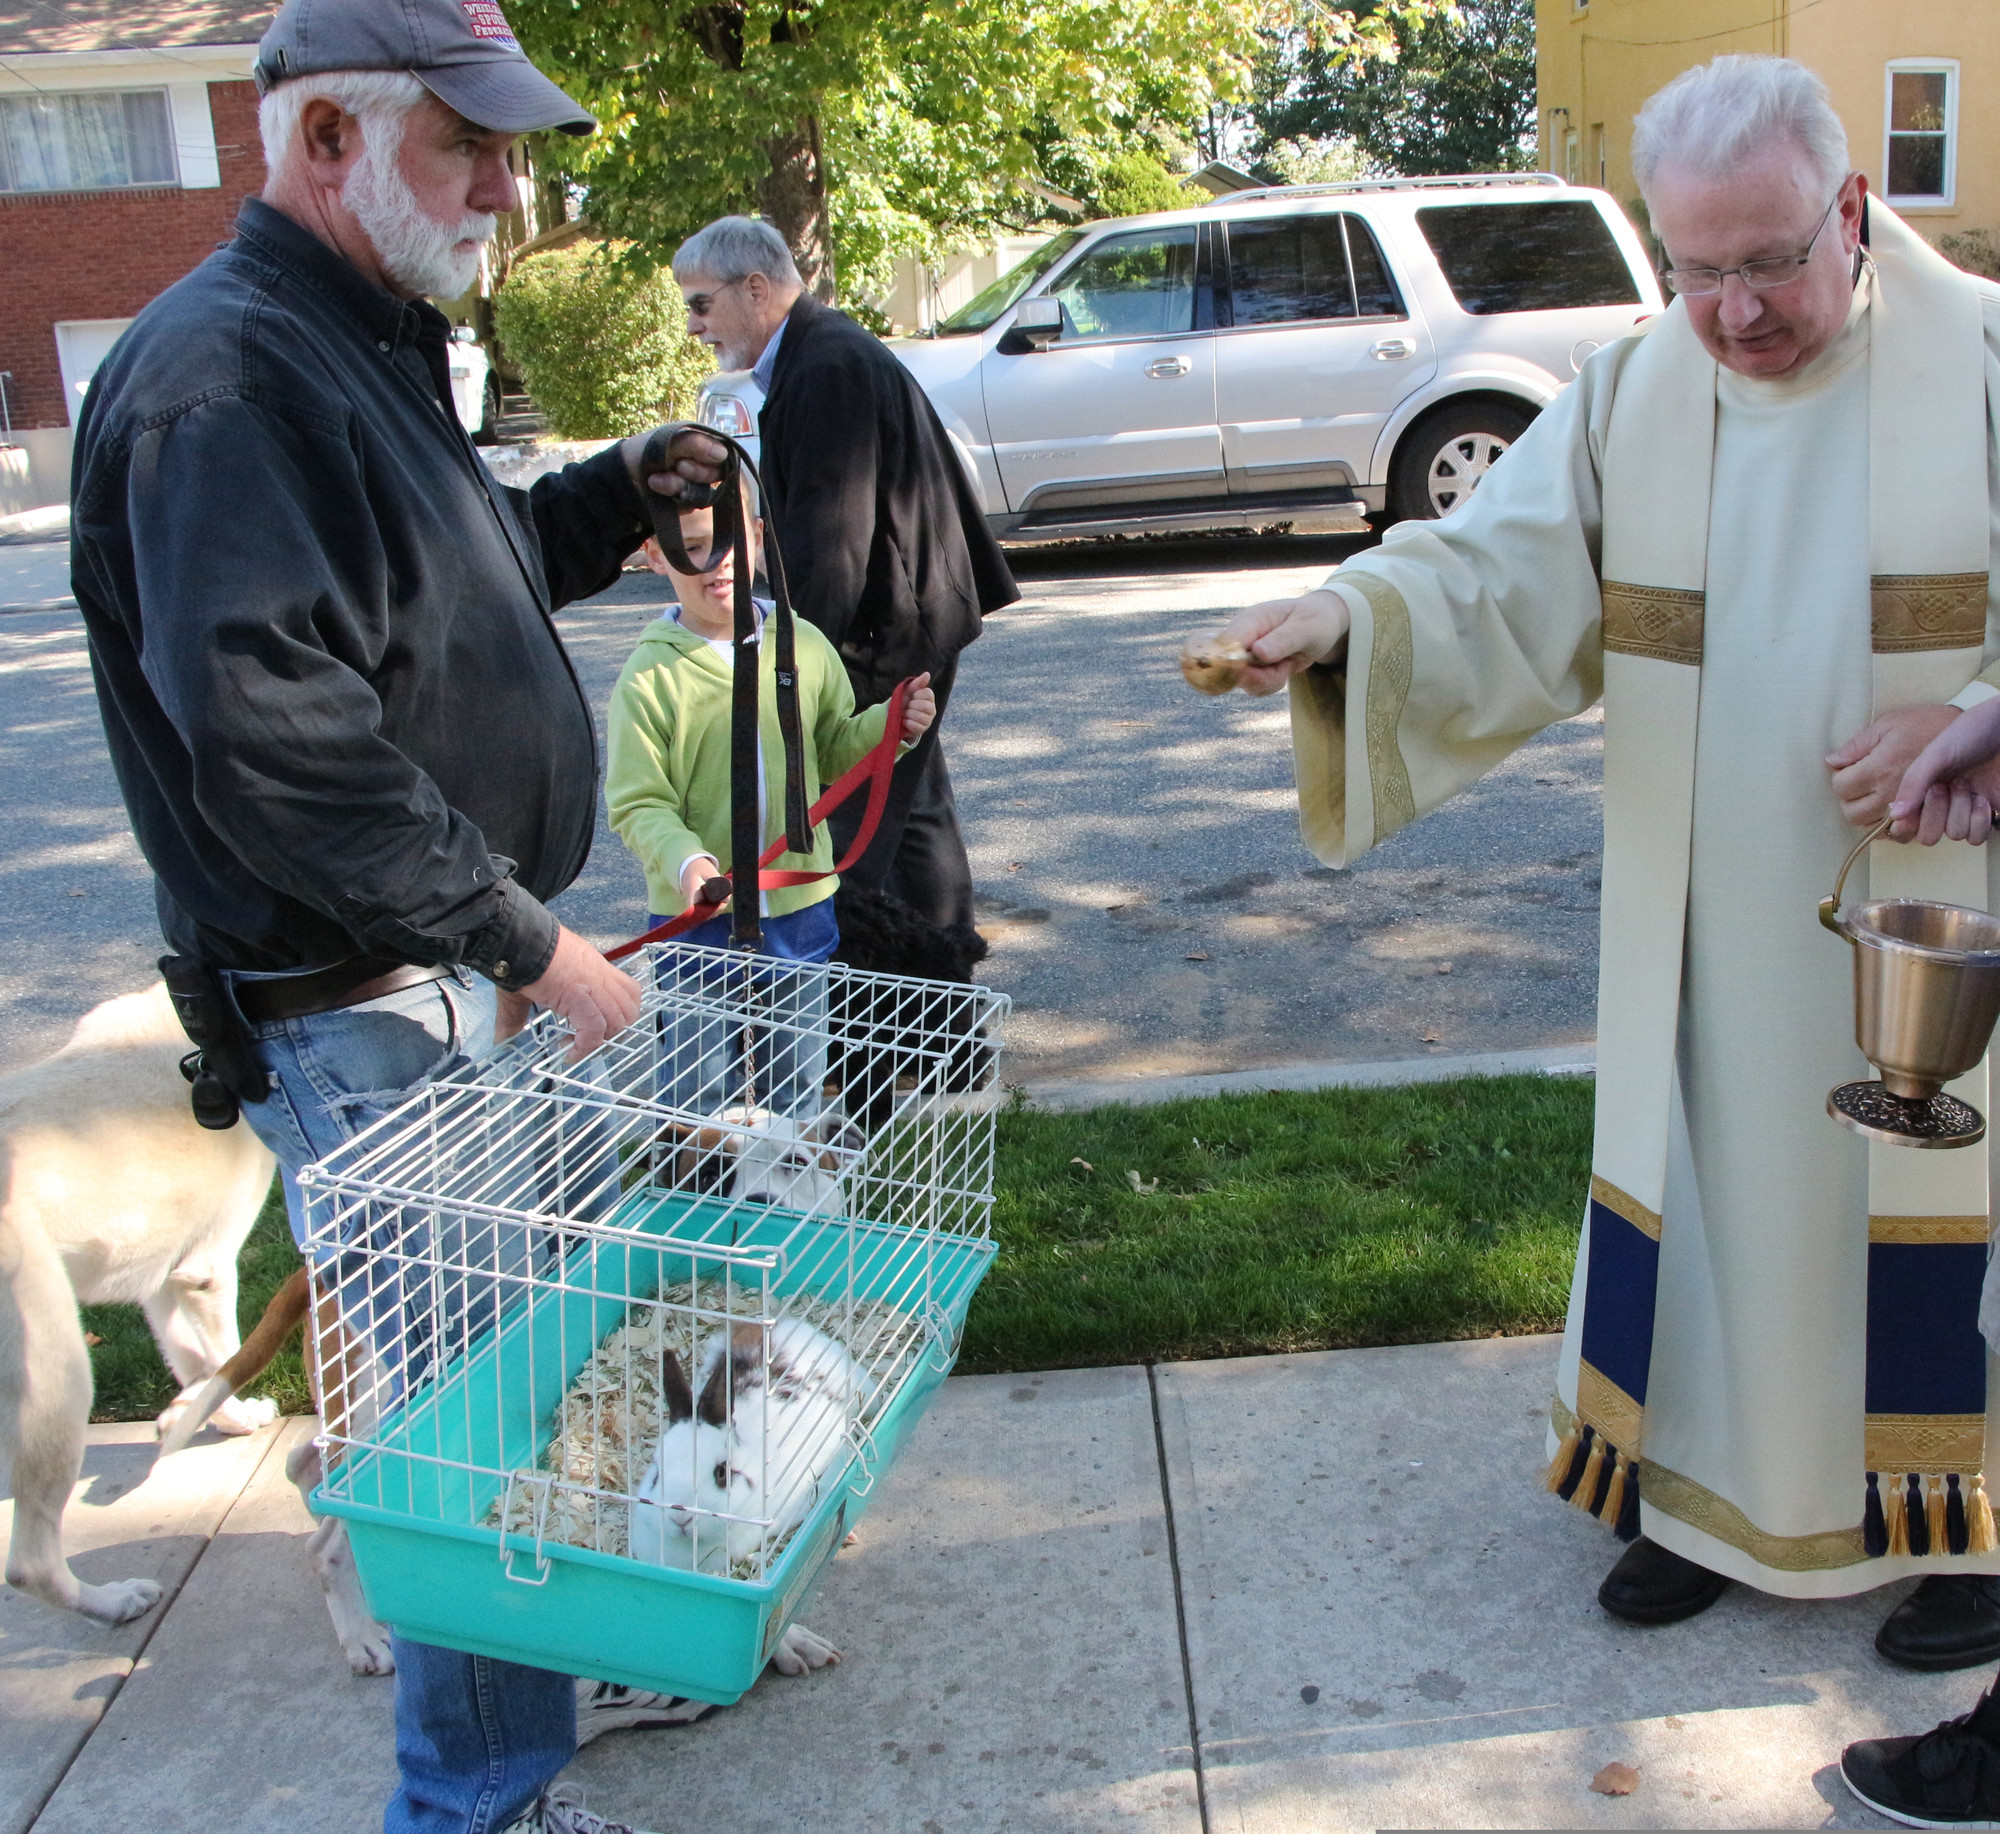 William Tait and Liam Kirwan had their bunny Thumper and their dog Sandy blessed on the nice
fall morning.